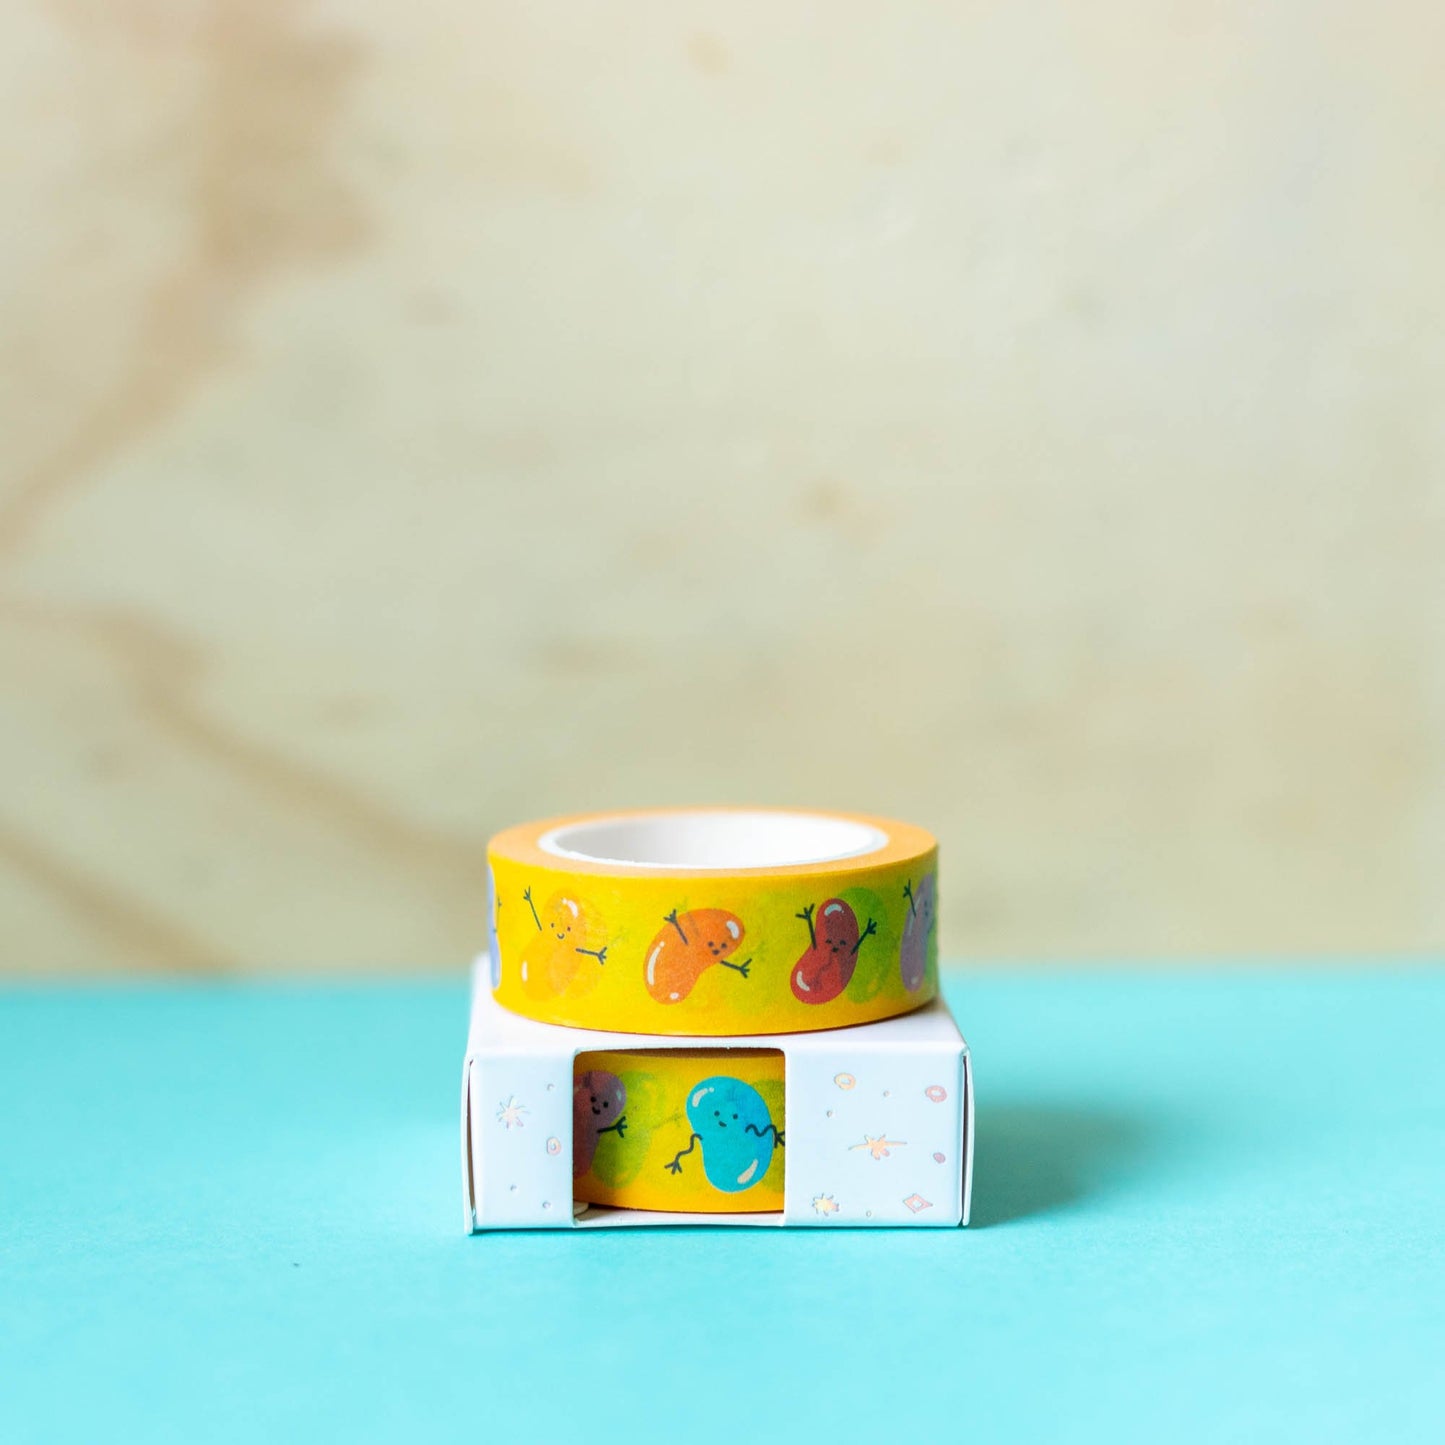 Cool Beans - Washi tape